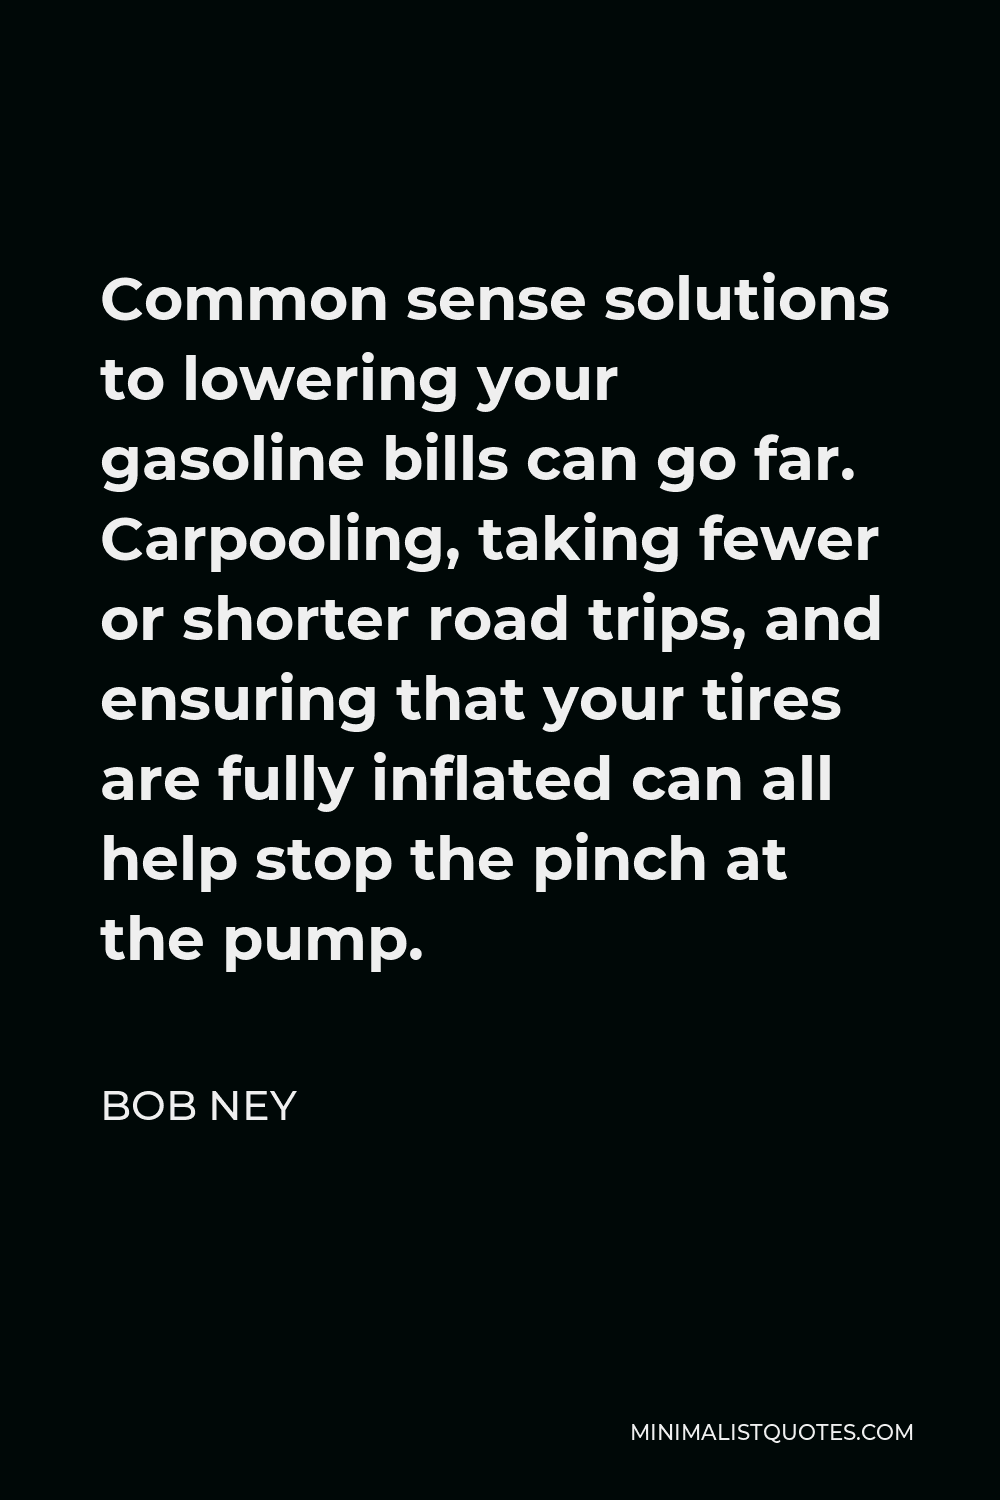 Bob Ney Quote - Common sense solutions to lowering your gasoline bills can go far. Carpooling, taking fewer or shorter road trips, and ensuring that your tires are fully inflated can all help stop the pinch at the pump.